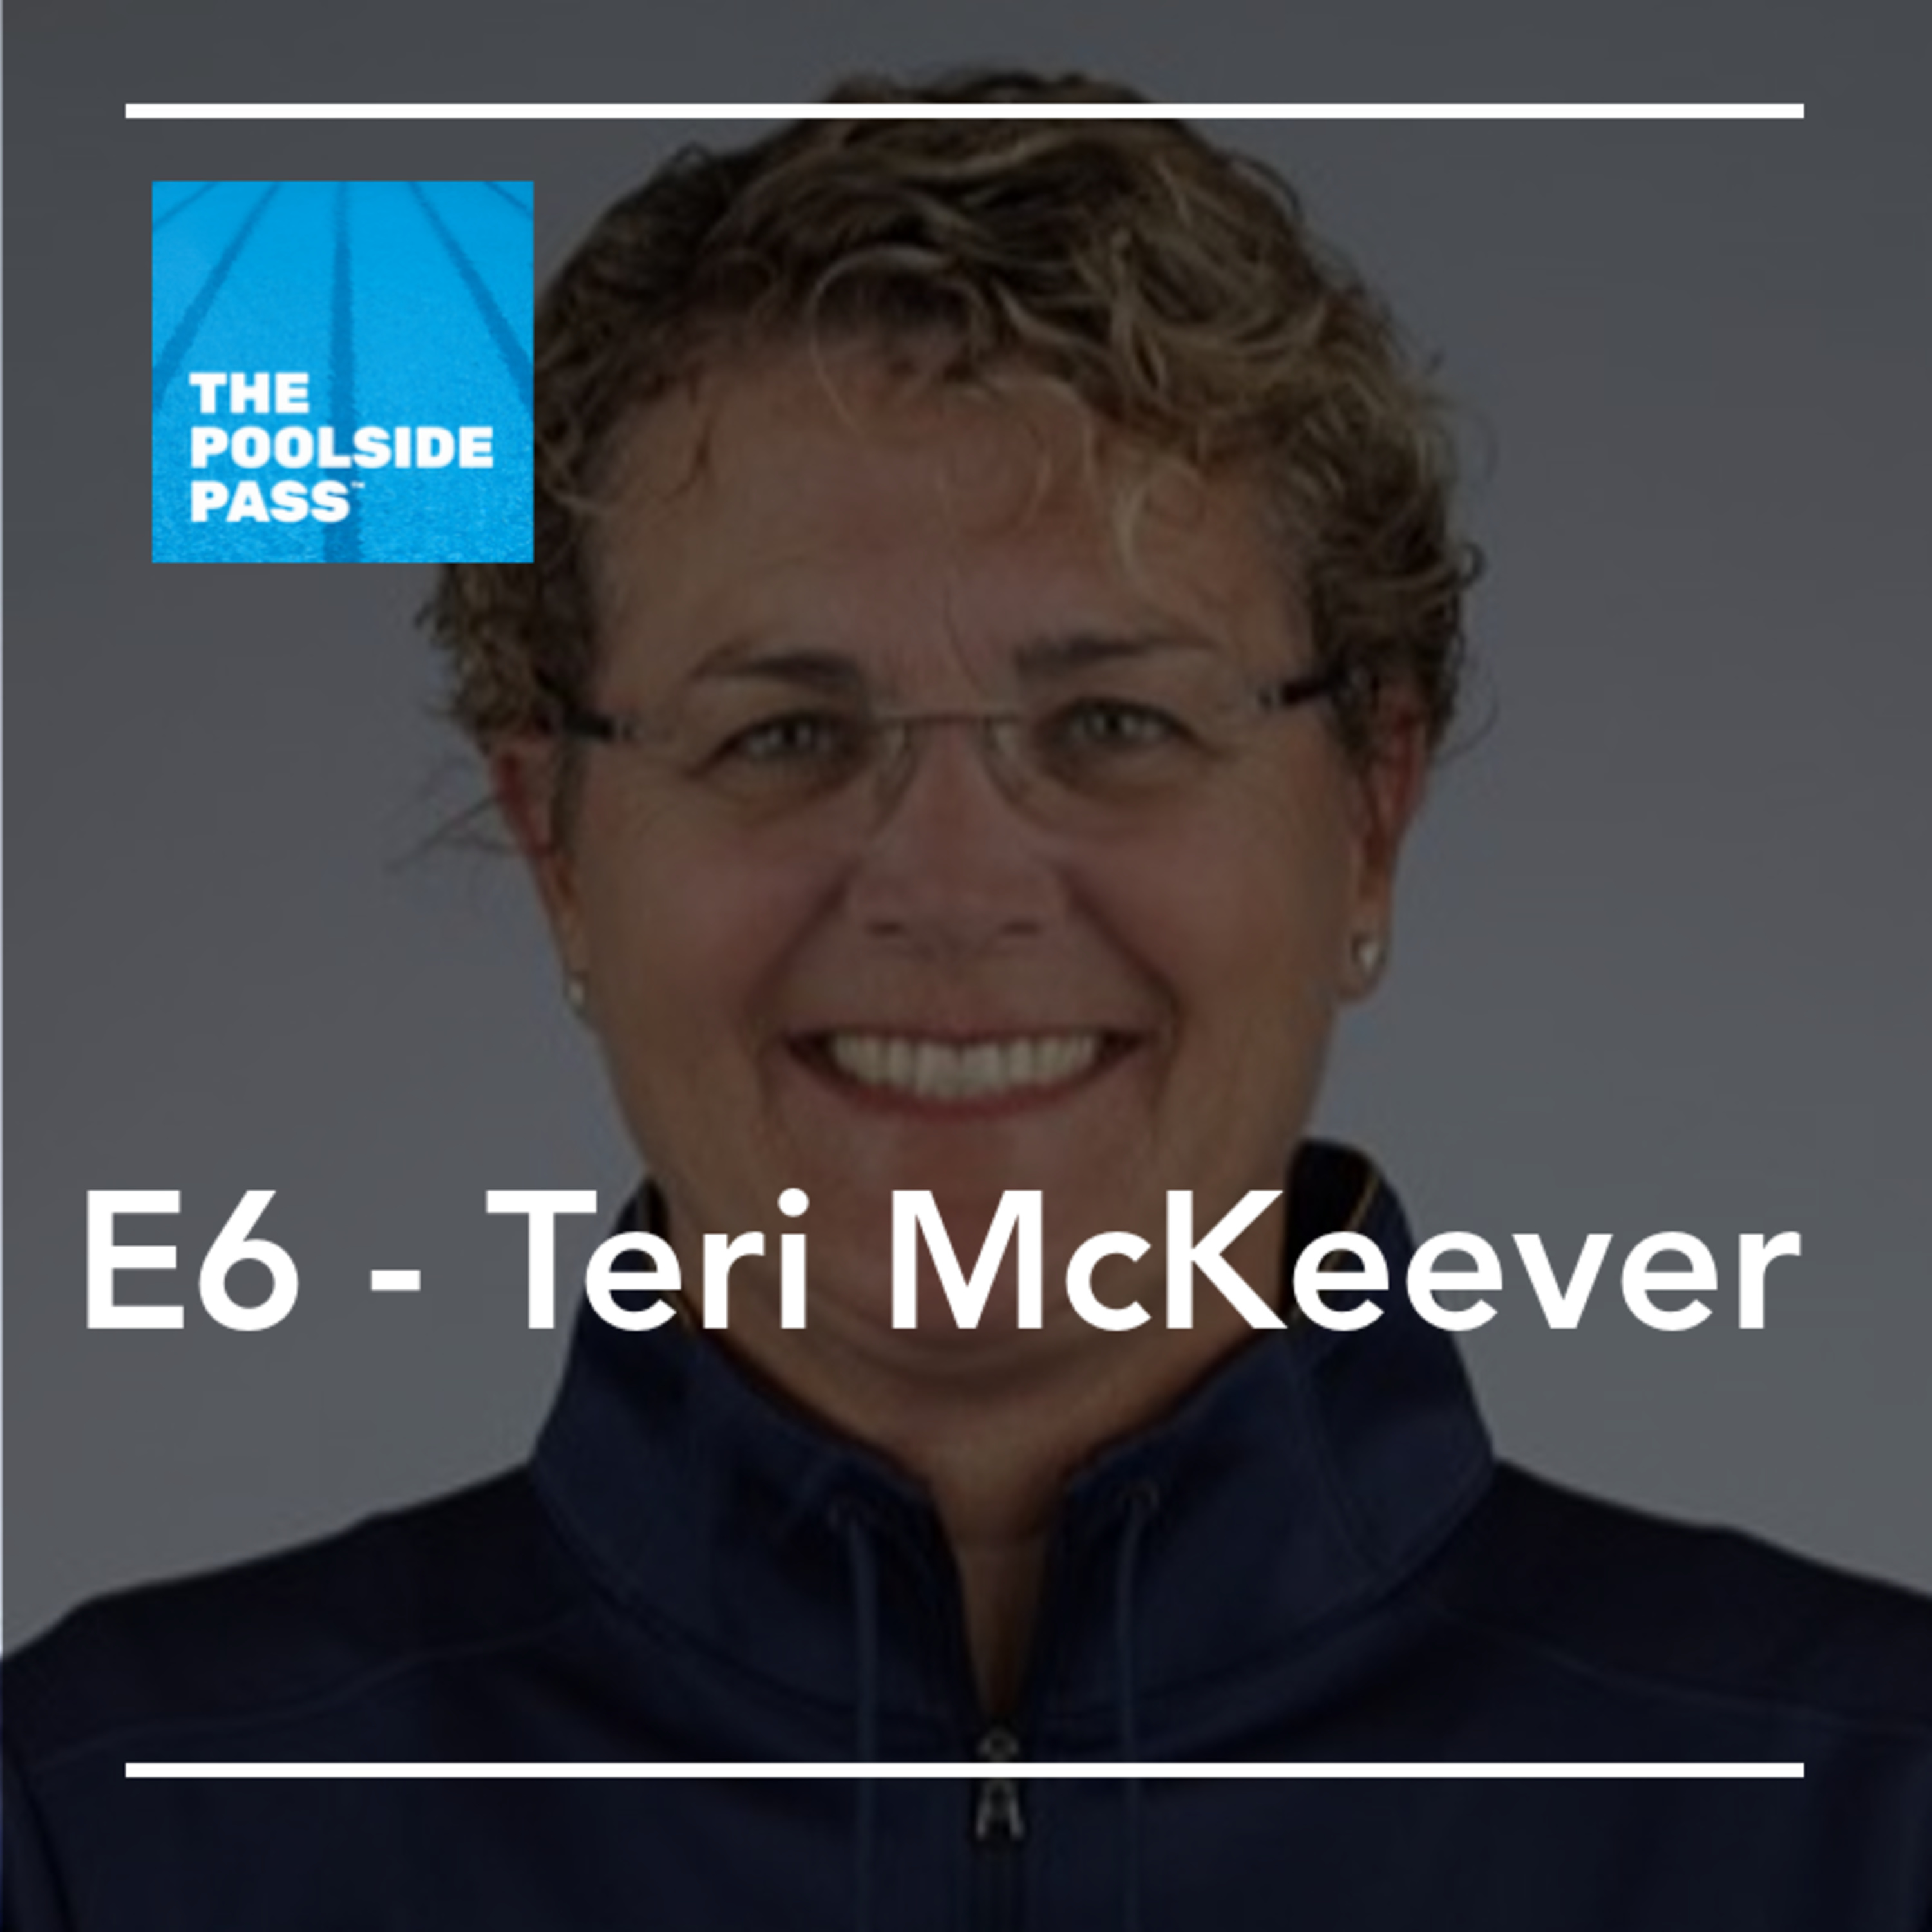 S3 E6 - Teri McKeever (Always plan for the biggest goal)